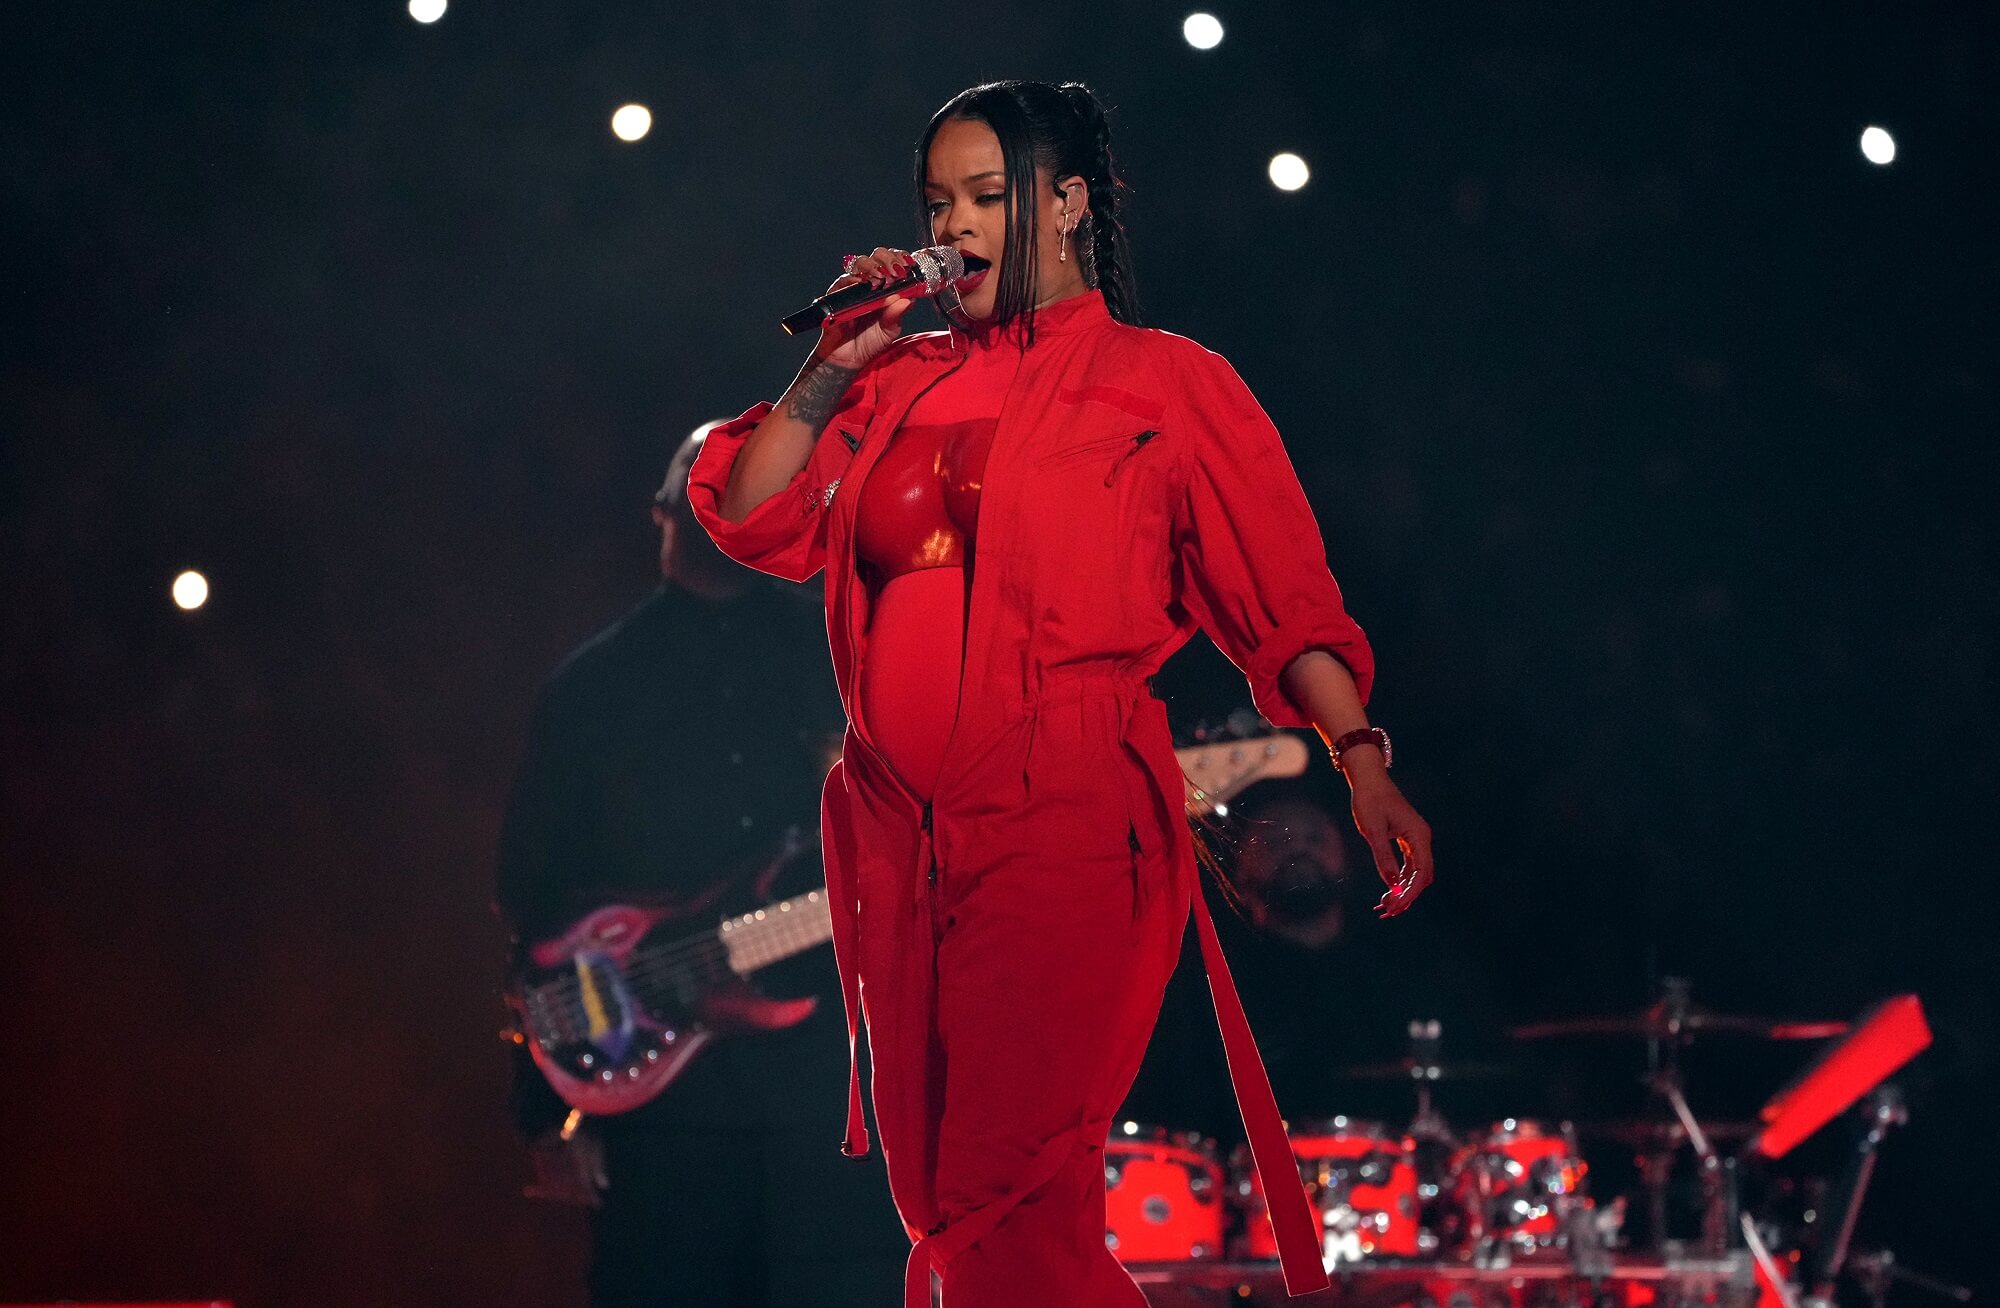 Rihanna performs onstage wearing a bright red outfit